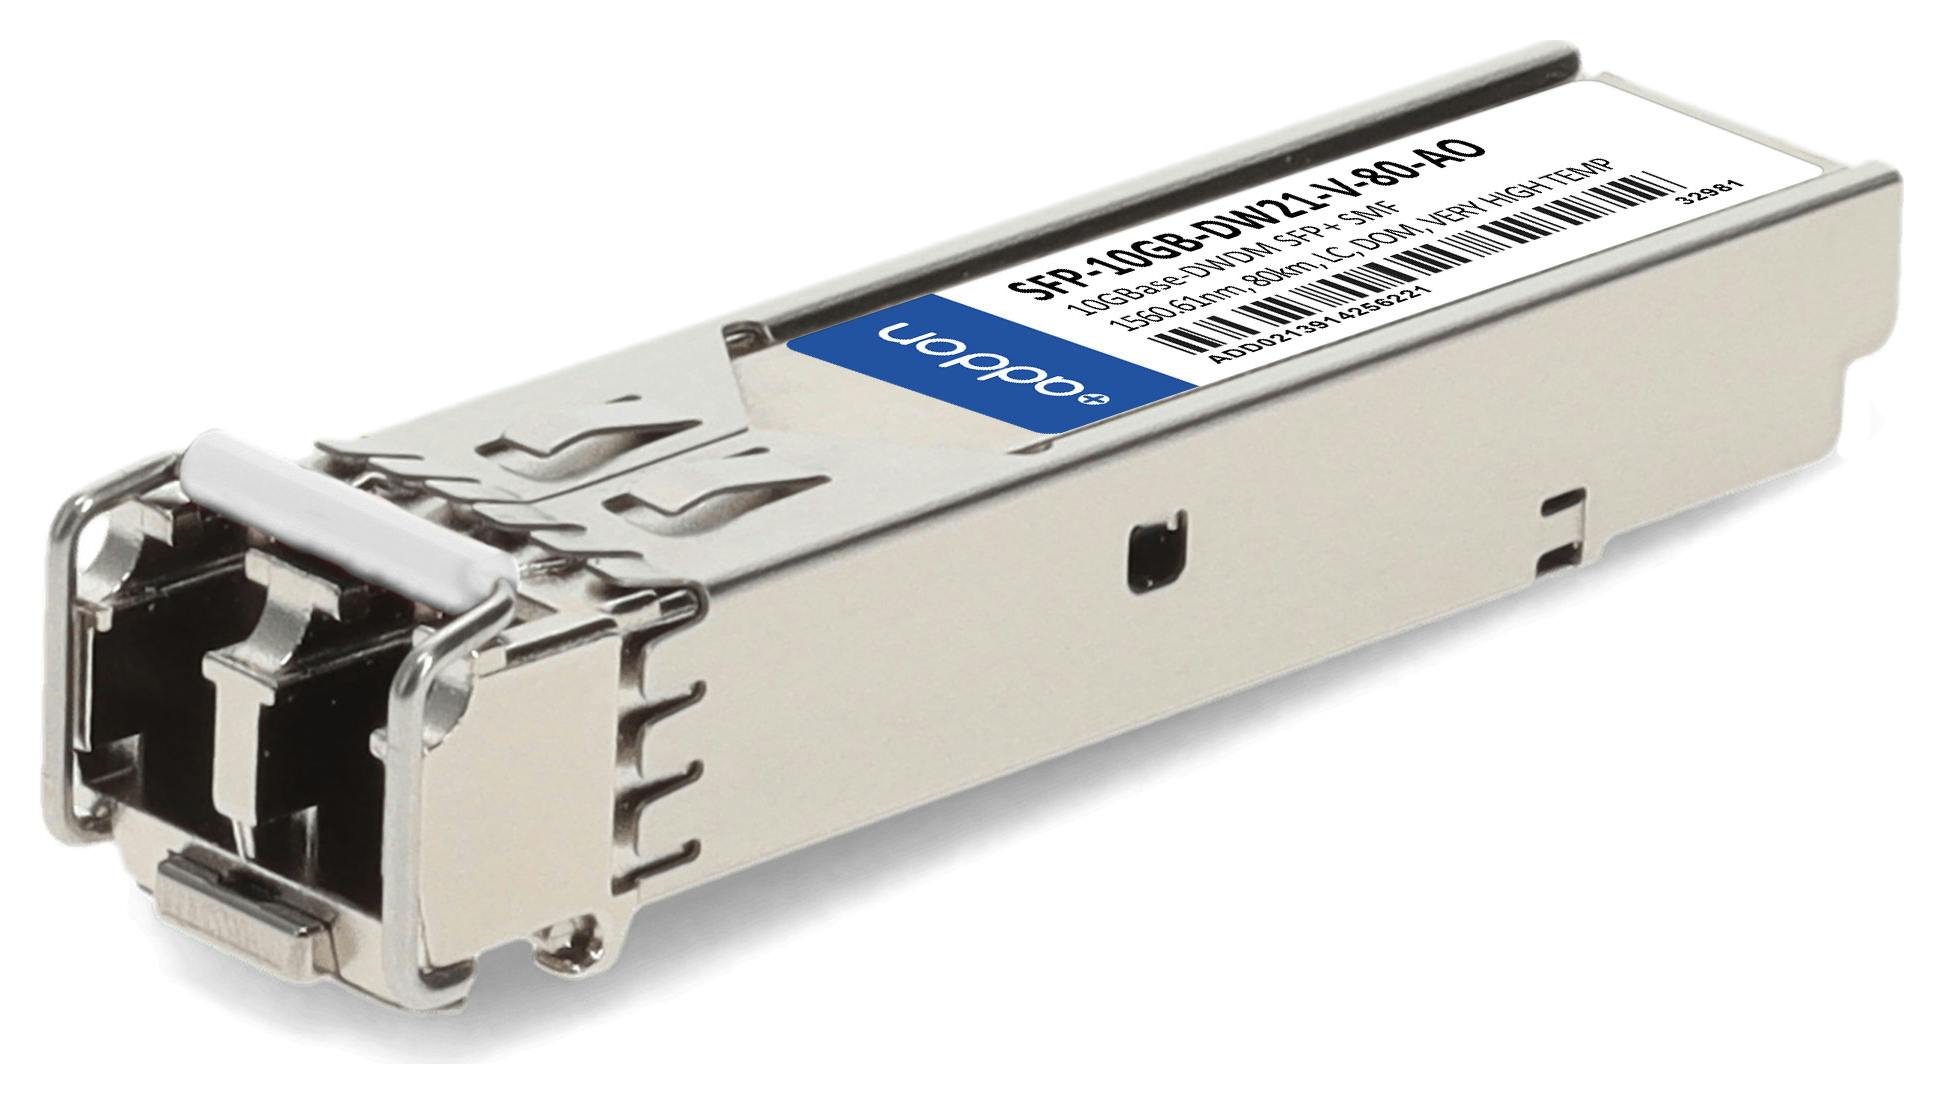 Very high temperature (VHT) SFP+ 80km optics keep your transport network optimized up to 95C